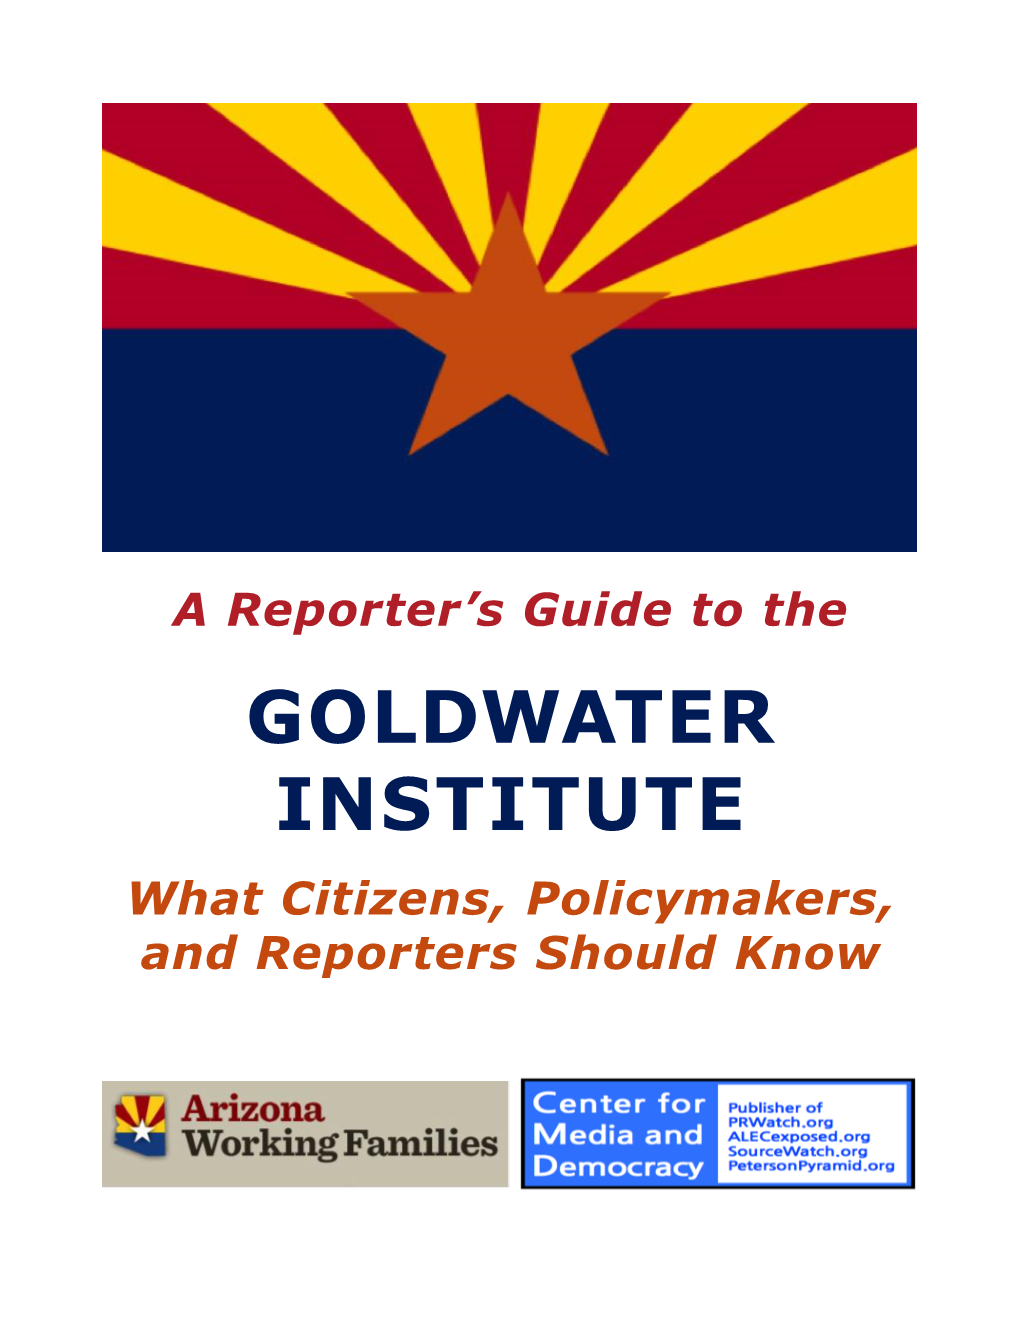 GOLDWATER INSTITUTE What Citizens, Policymakers, and Reporters Should Know